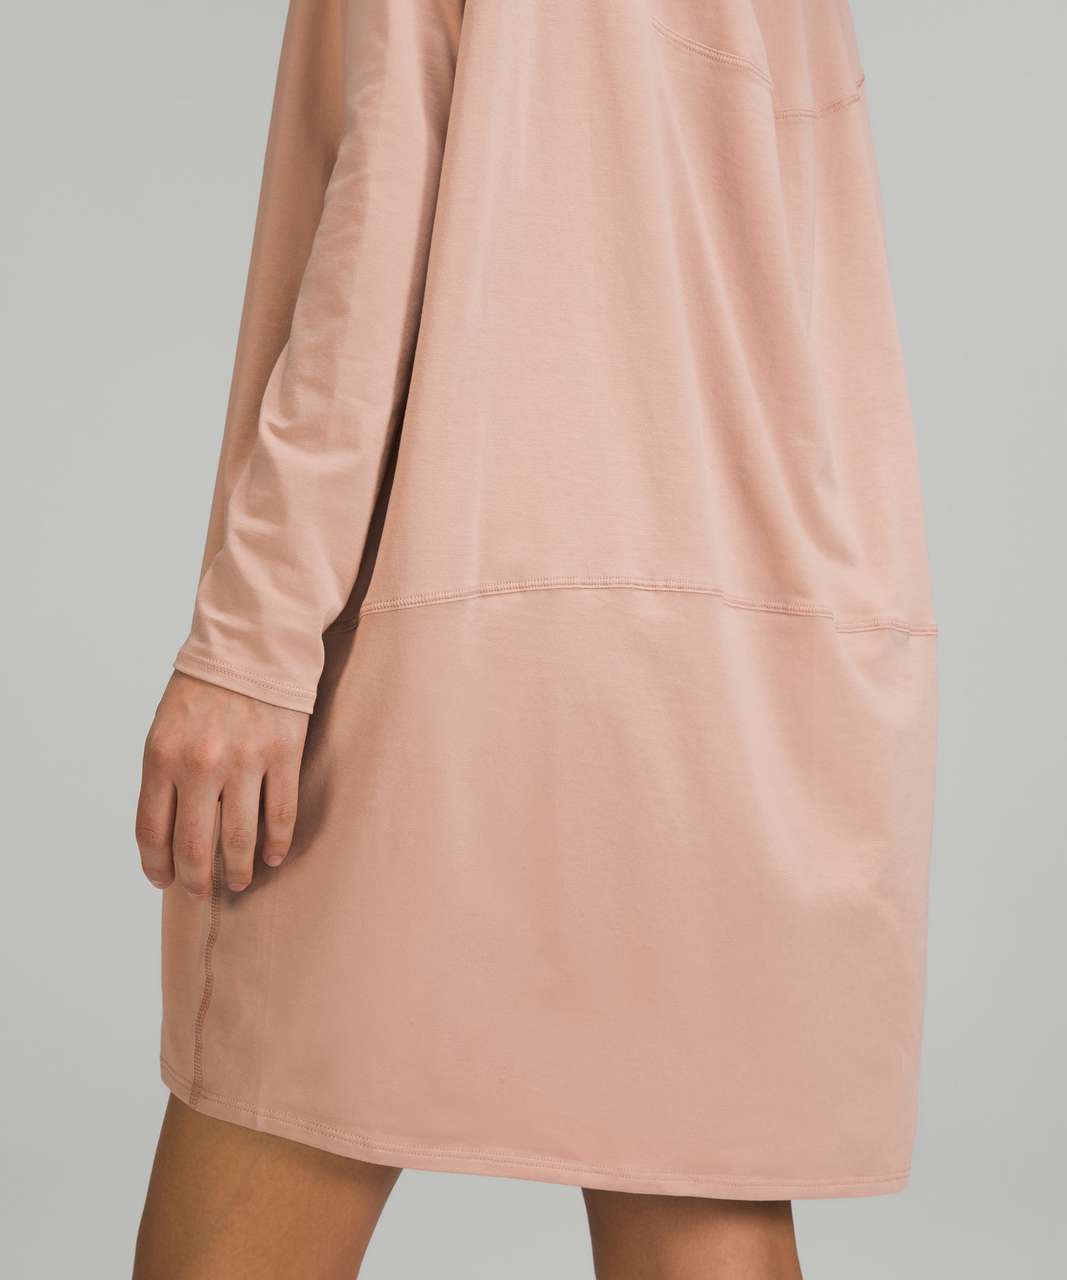 Lululemon Back in Action Long Sleeve Dress - Pink Clay